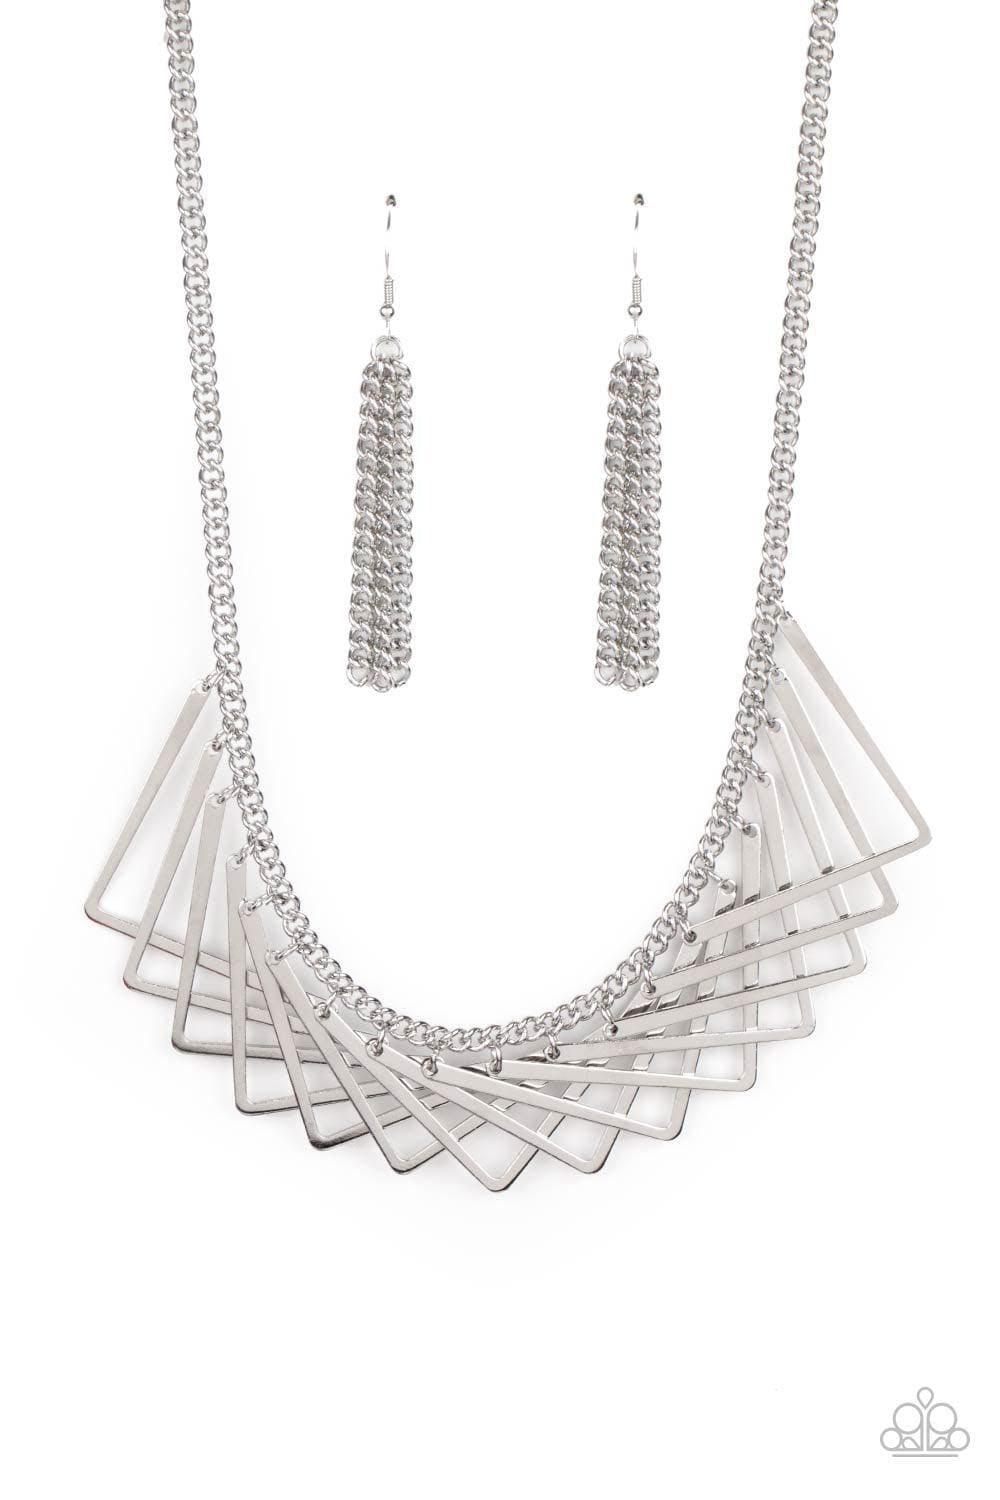 Paparazzi Accessories - Metro Mirage - Silver Necklace - Bling by JessieK